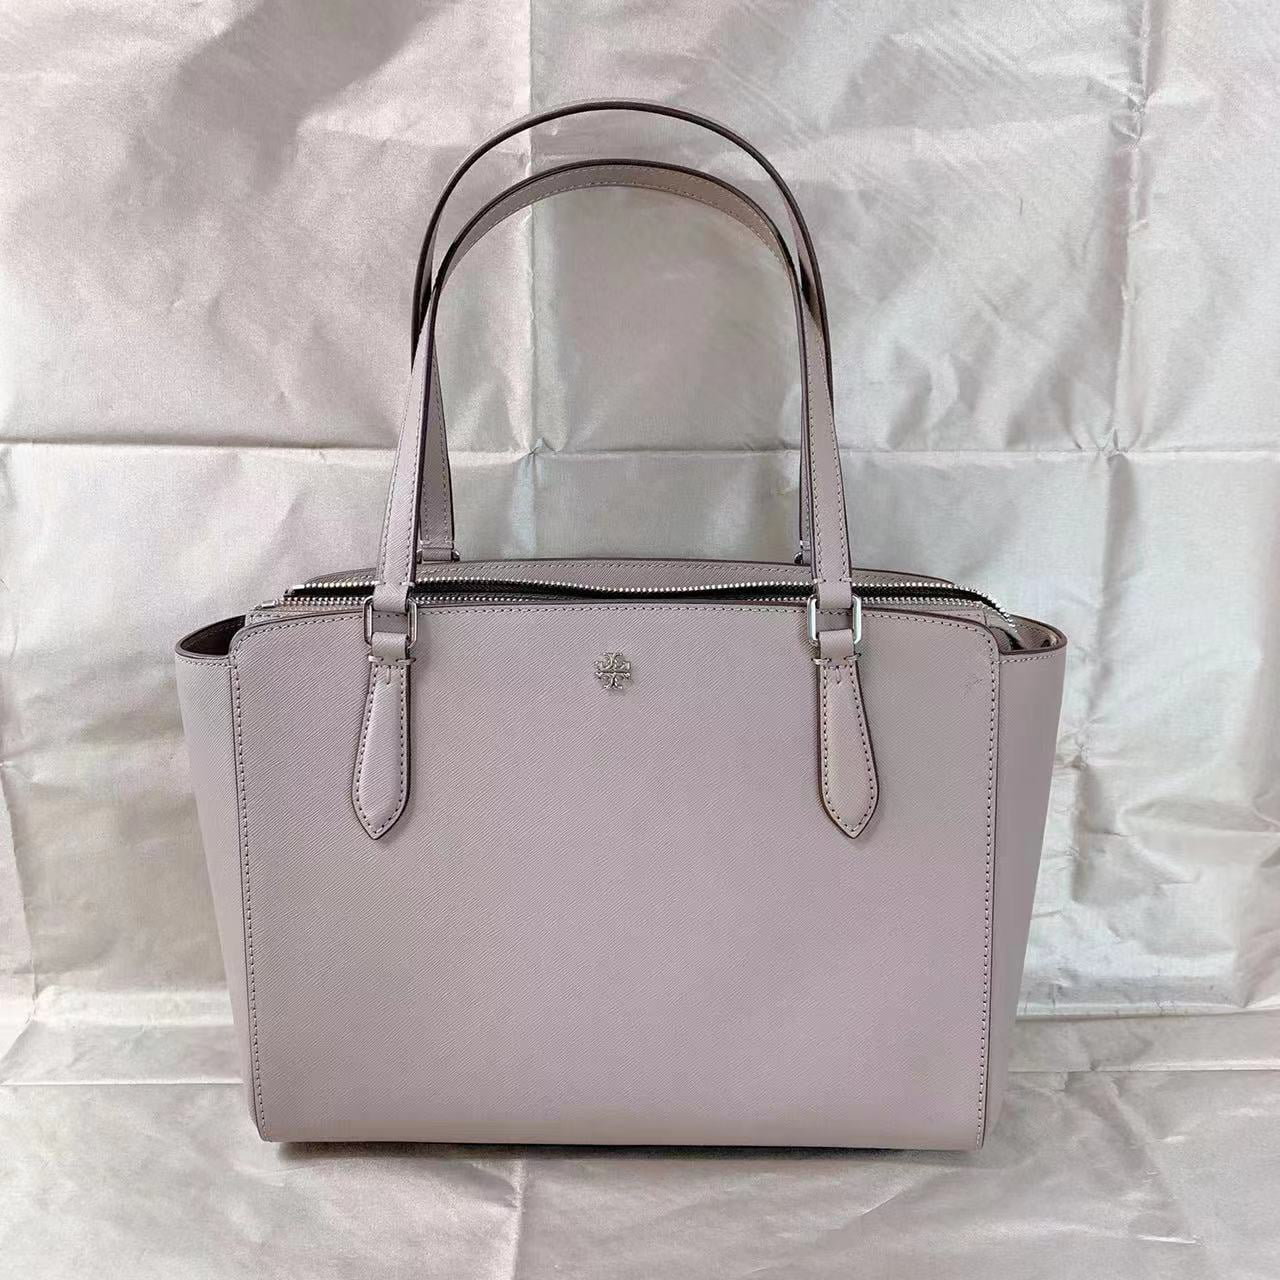 Buy Tory Burch 64188 1119 Emerson Small Top Zip Tote In Gray Heron Online  at Lowest Price in Ubuy Nepal. 874575980